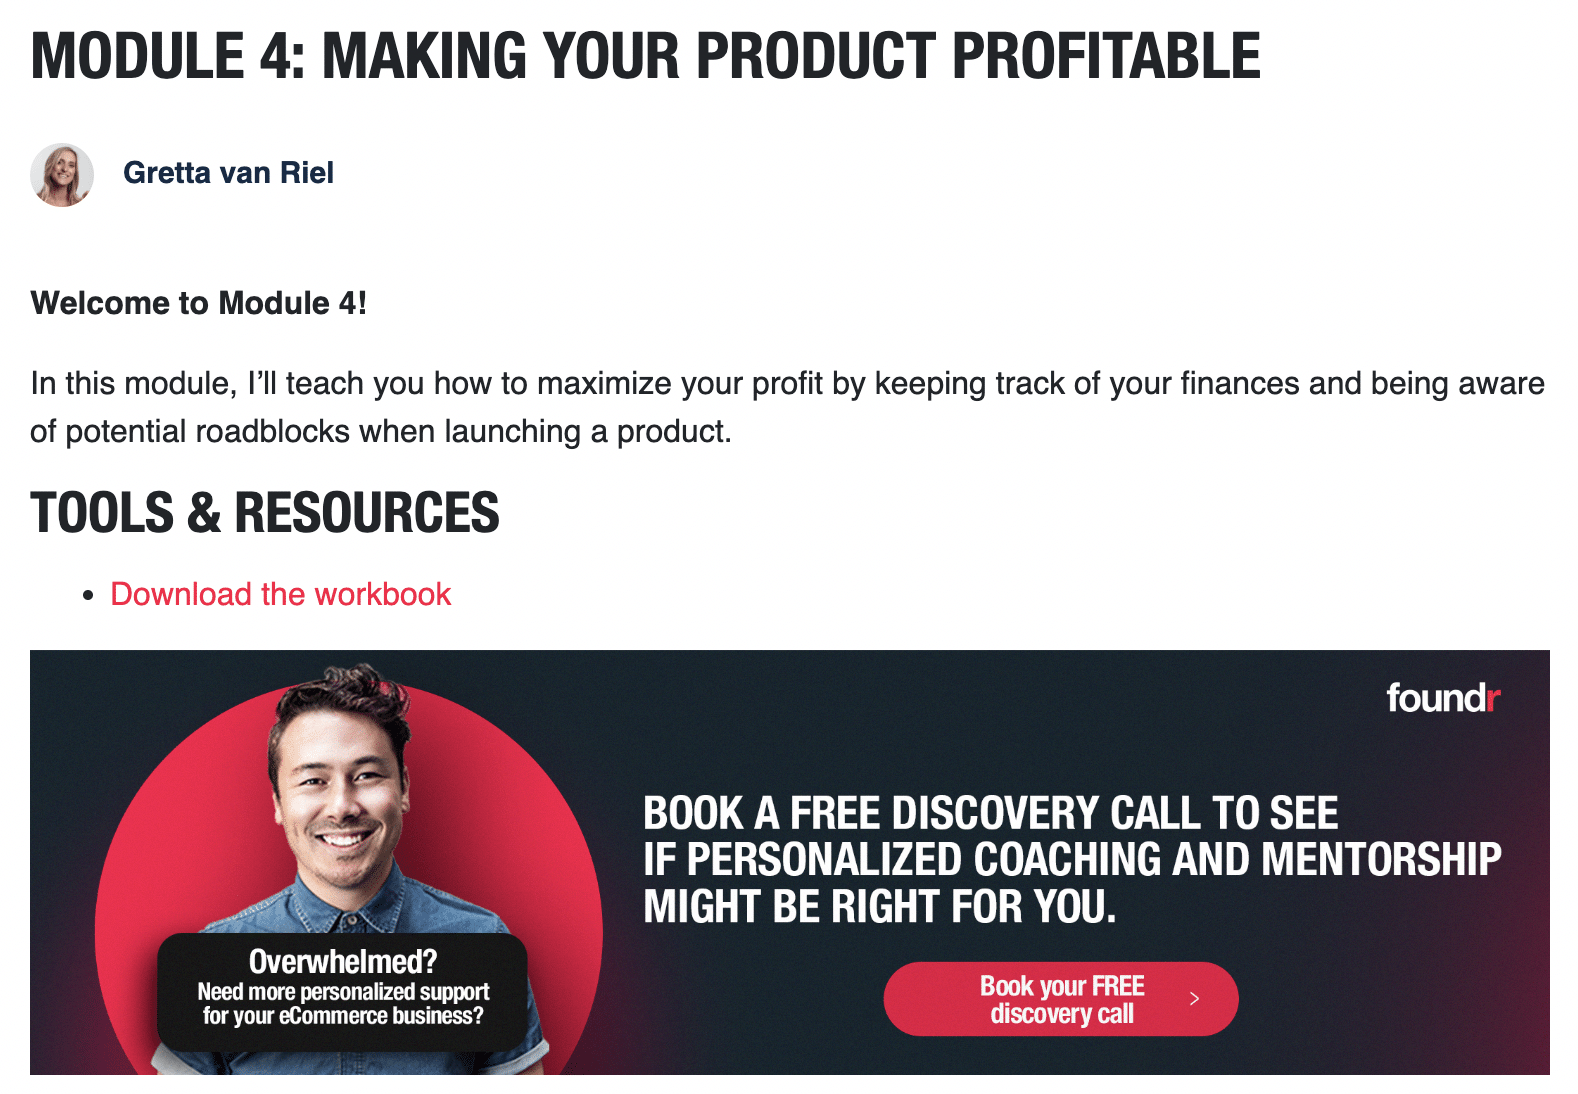 Module 4: Making Your Product Profitable